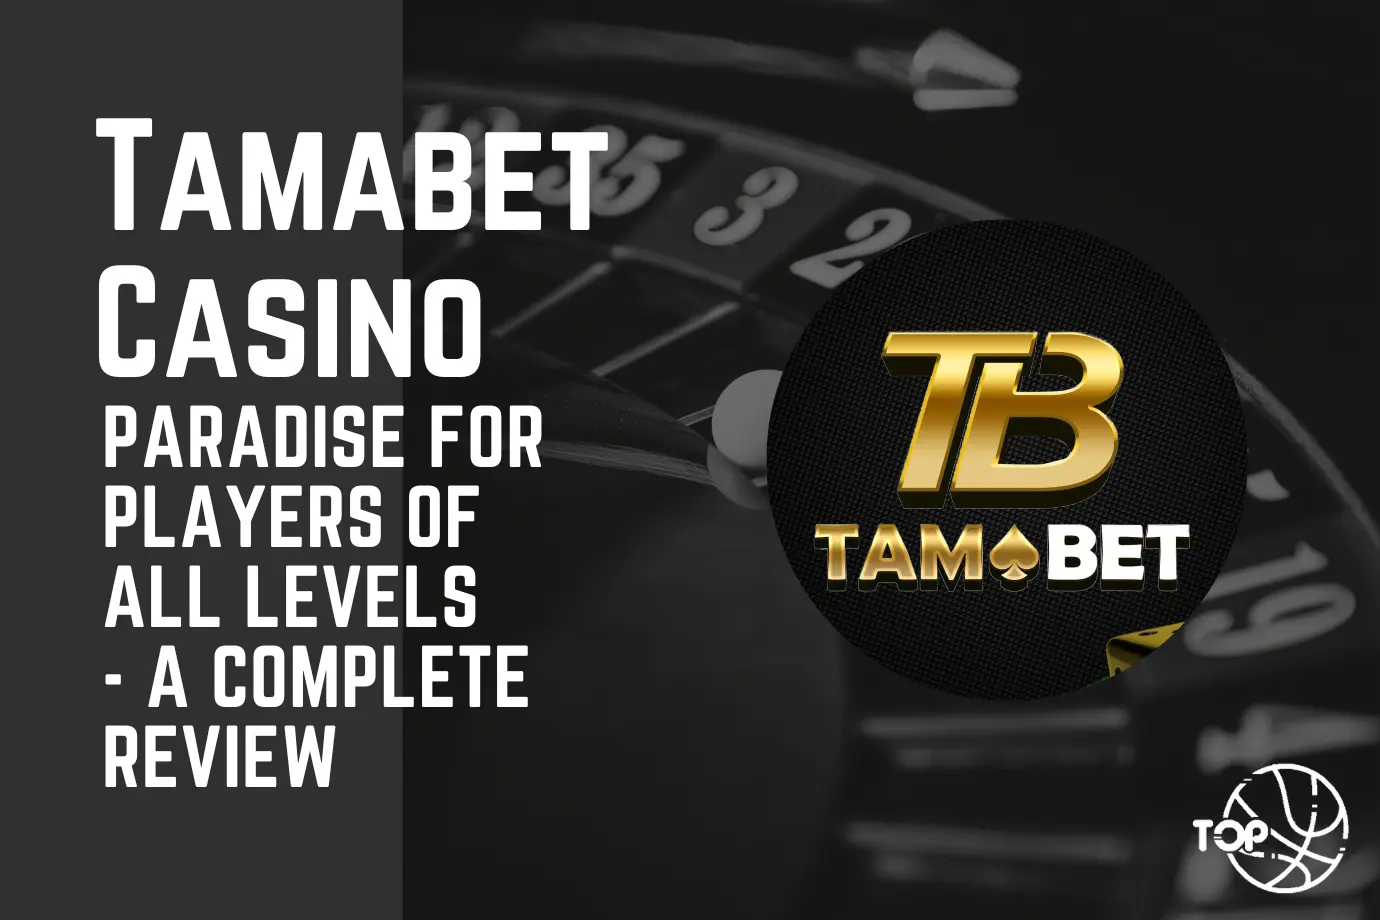 Tamabet Casino: Paradise for Players of All Levels - A Complete Review